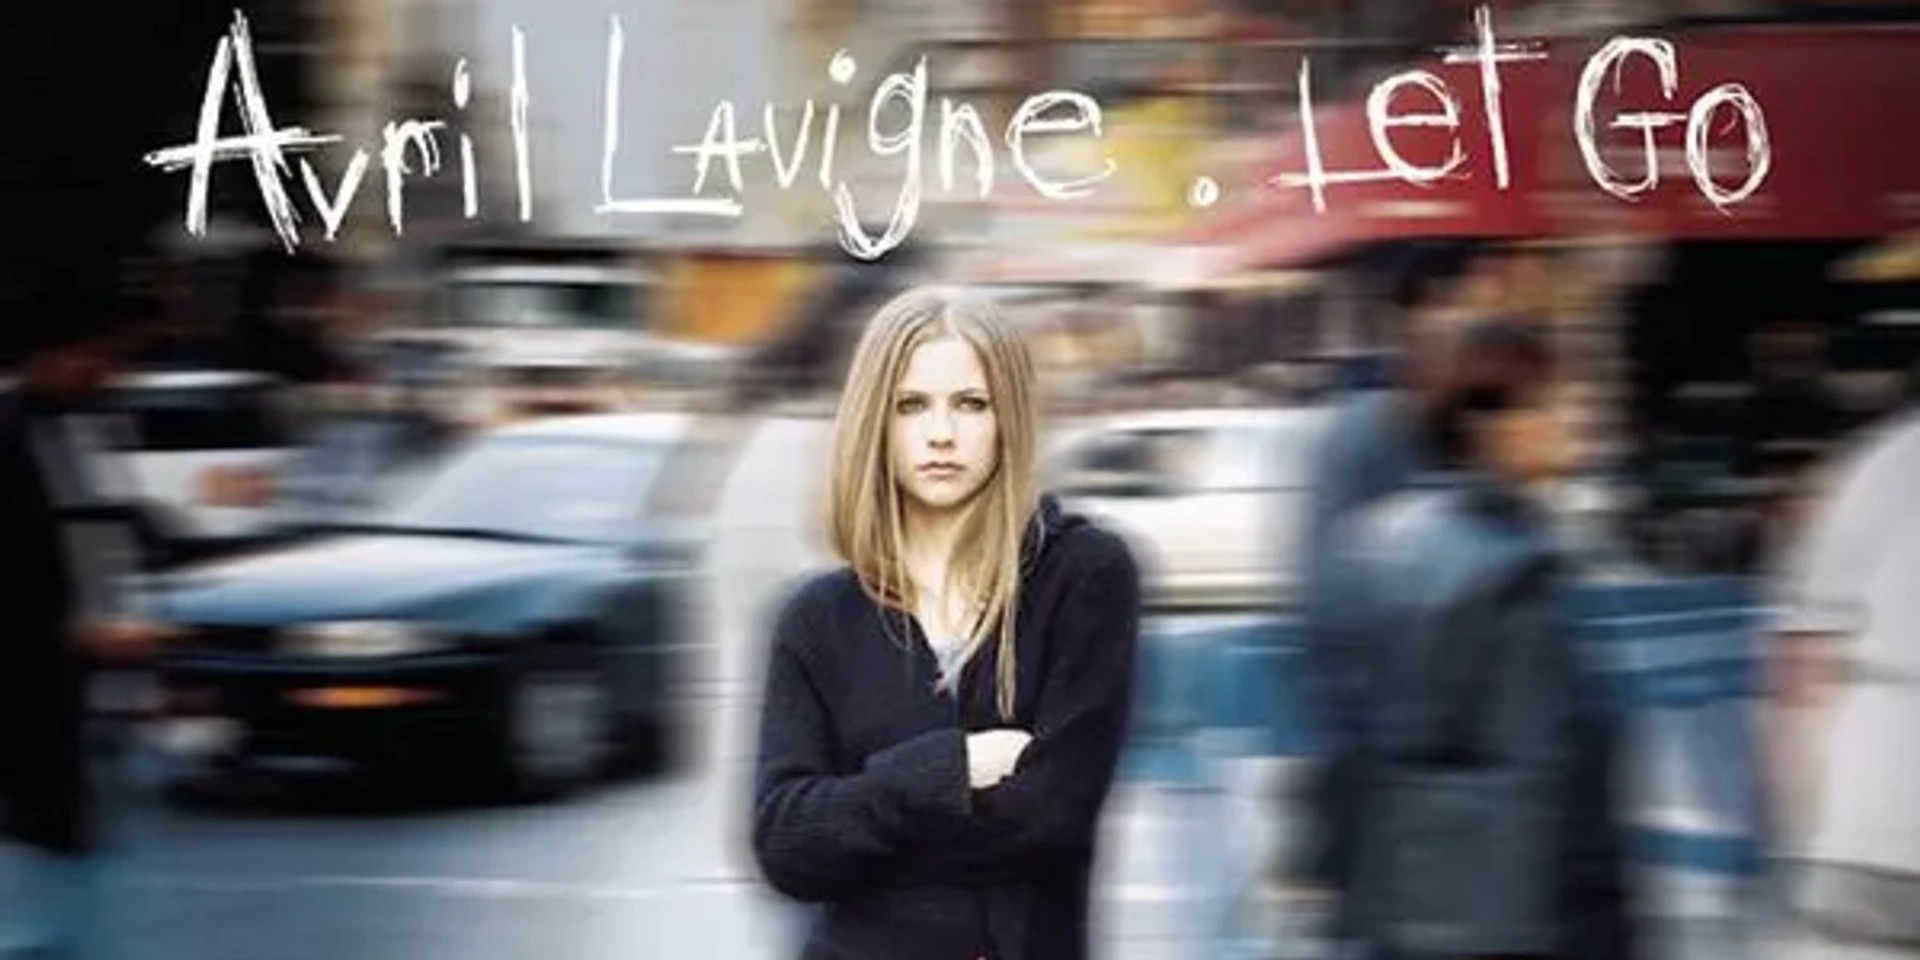 20 years of 'Let Go': Revisiting Avril Lavigne's iconic pop-punk debut